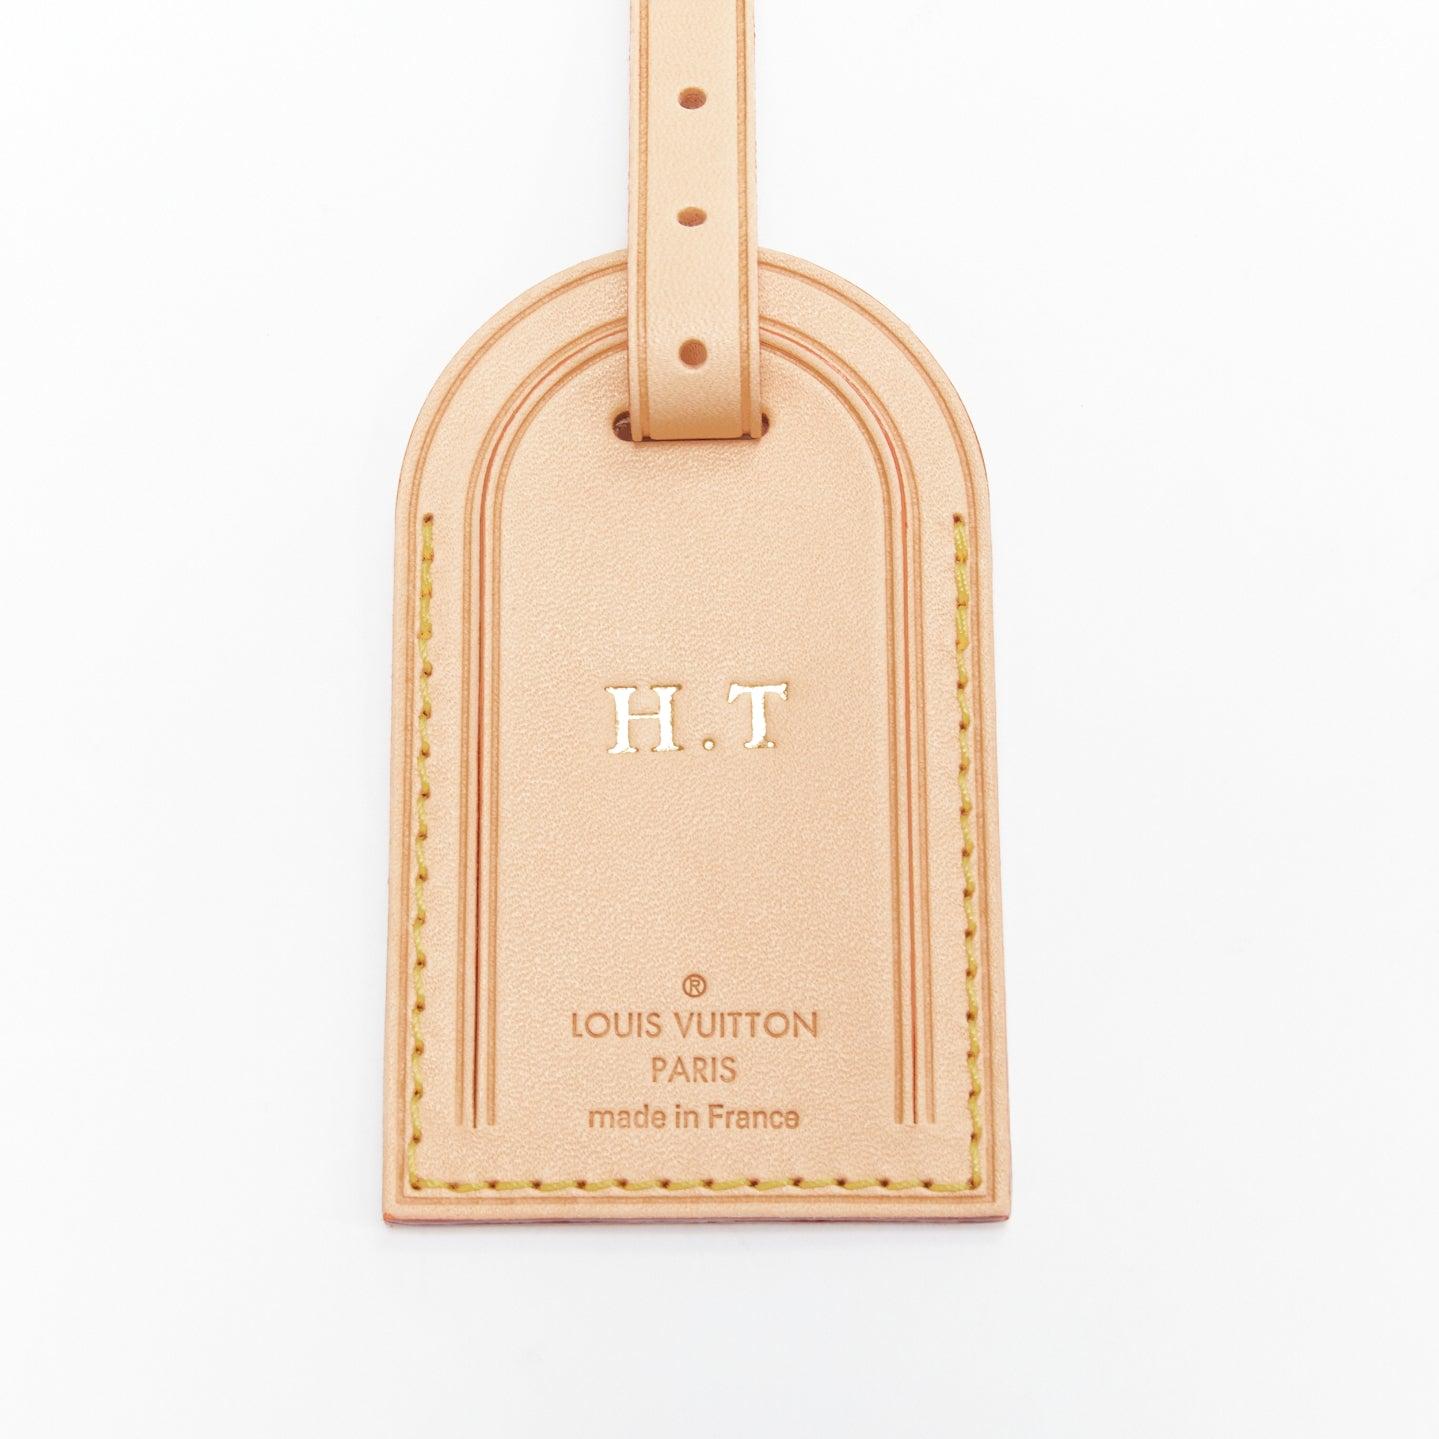 Gold LOUIS VUITTON Vachetta leather gold HT foil stamp luggage tag For Sale